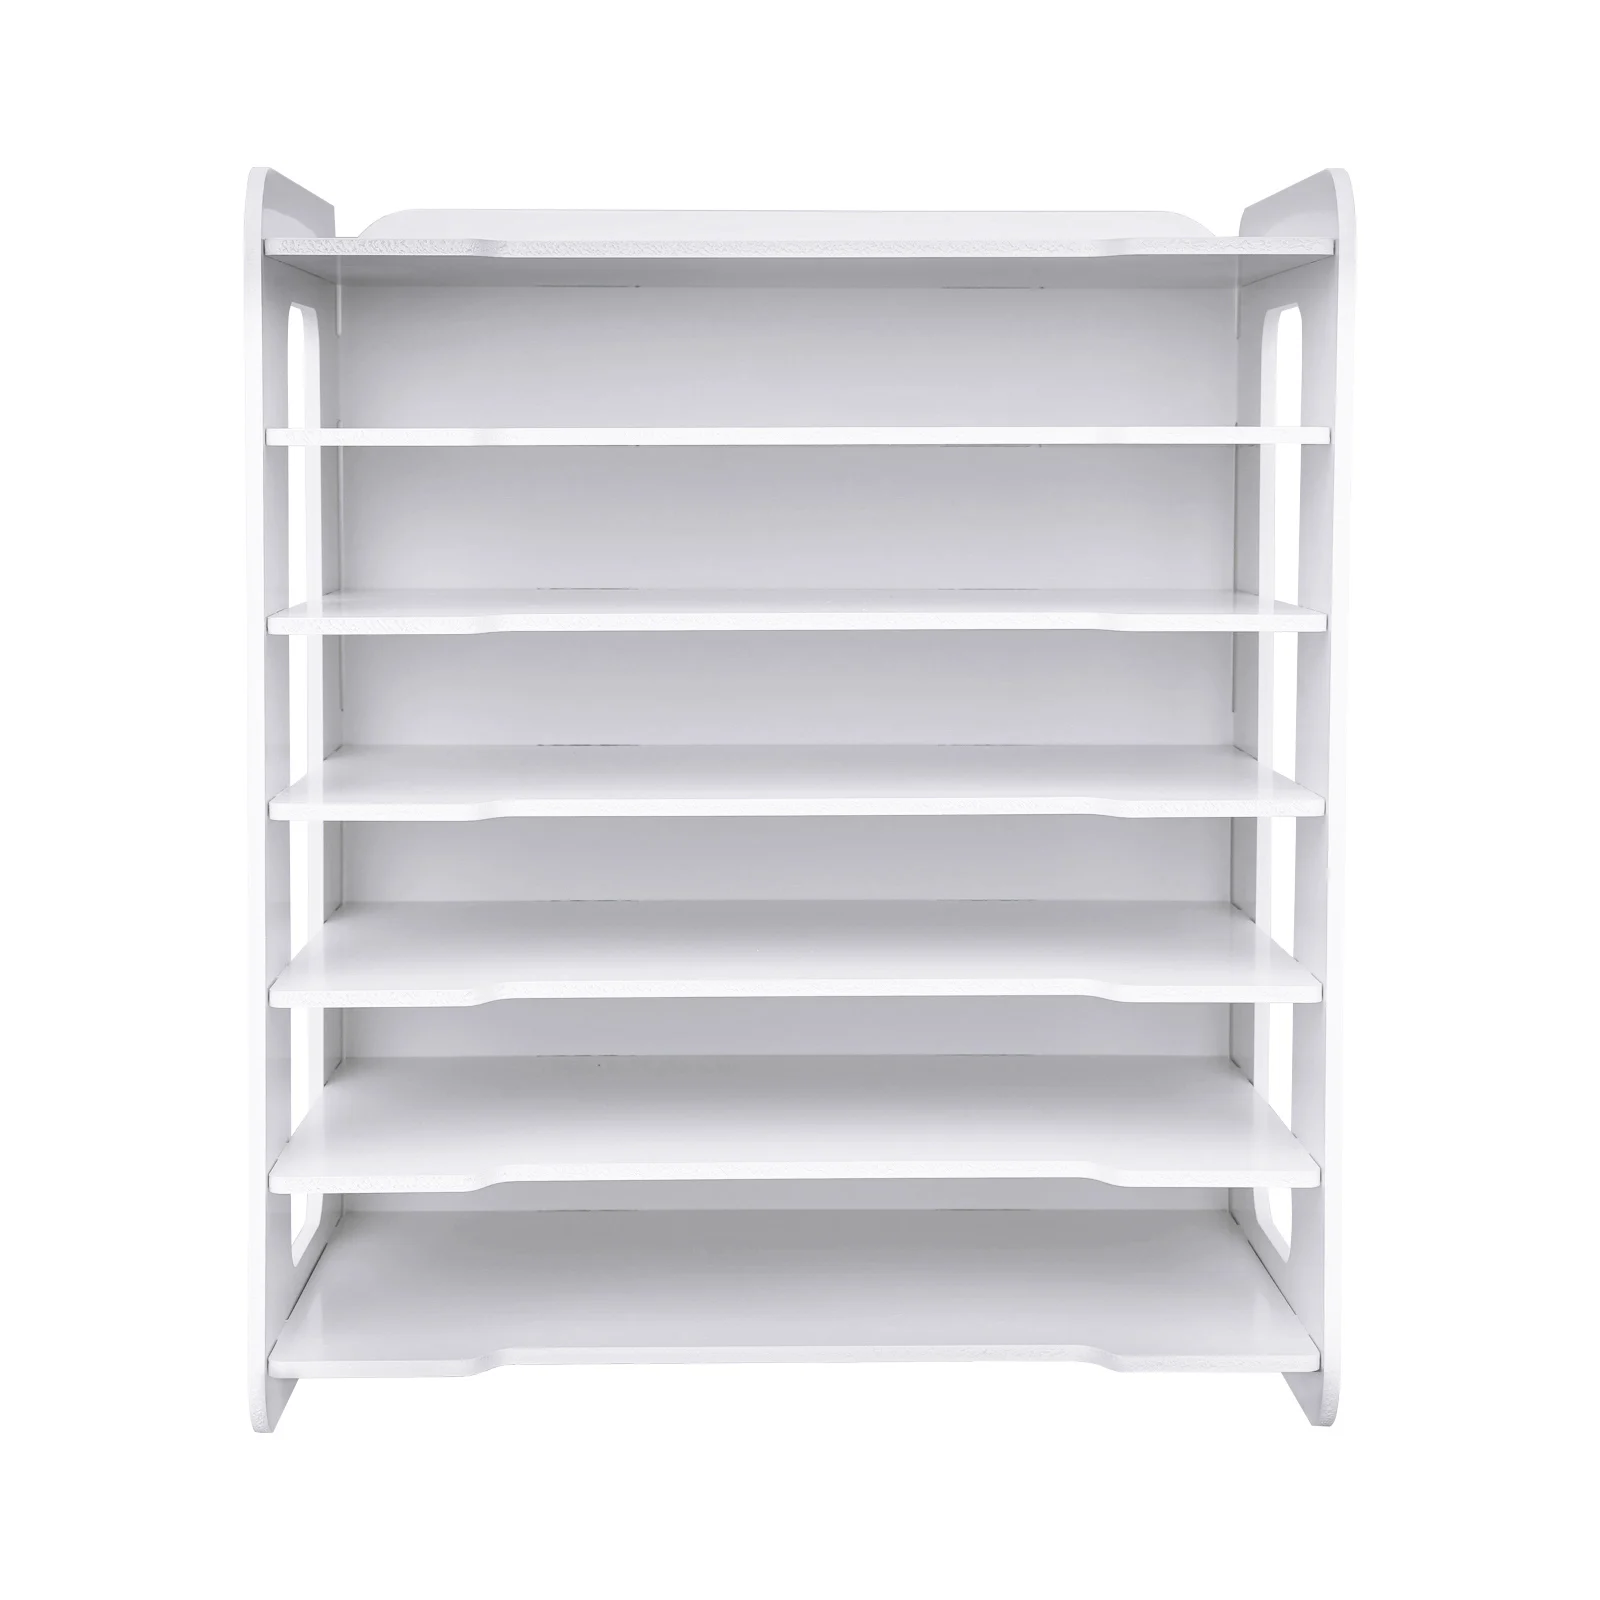 White Wooden File Rack for Office Desk, Desktop Organizers and Accessories, Letter Tray, Paper Sorter Holder, 7 Layers